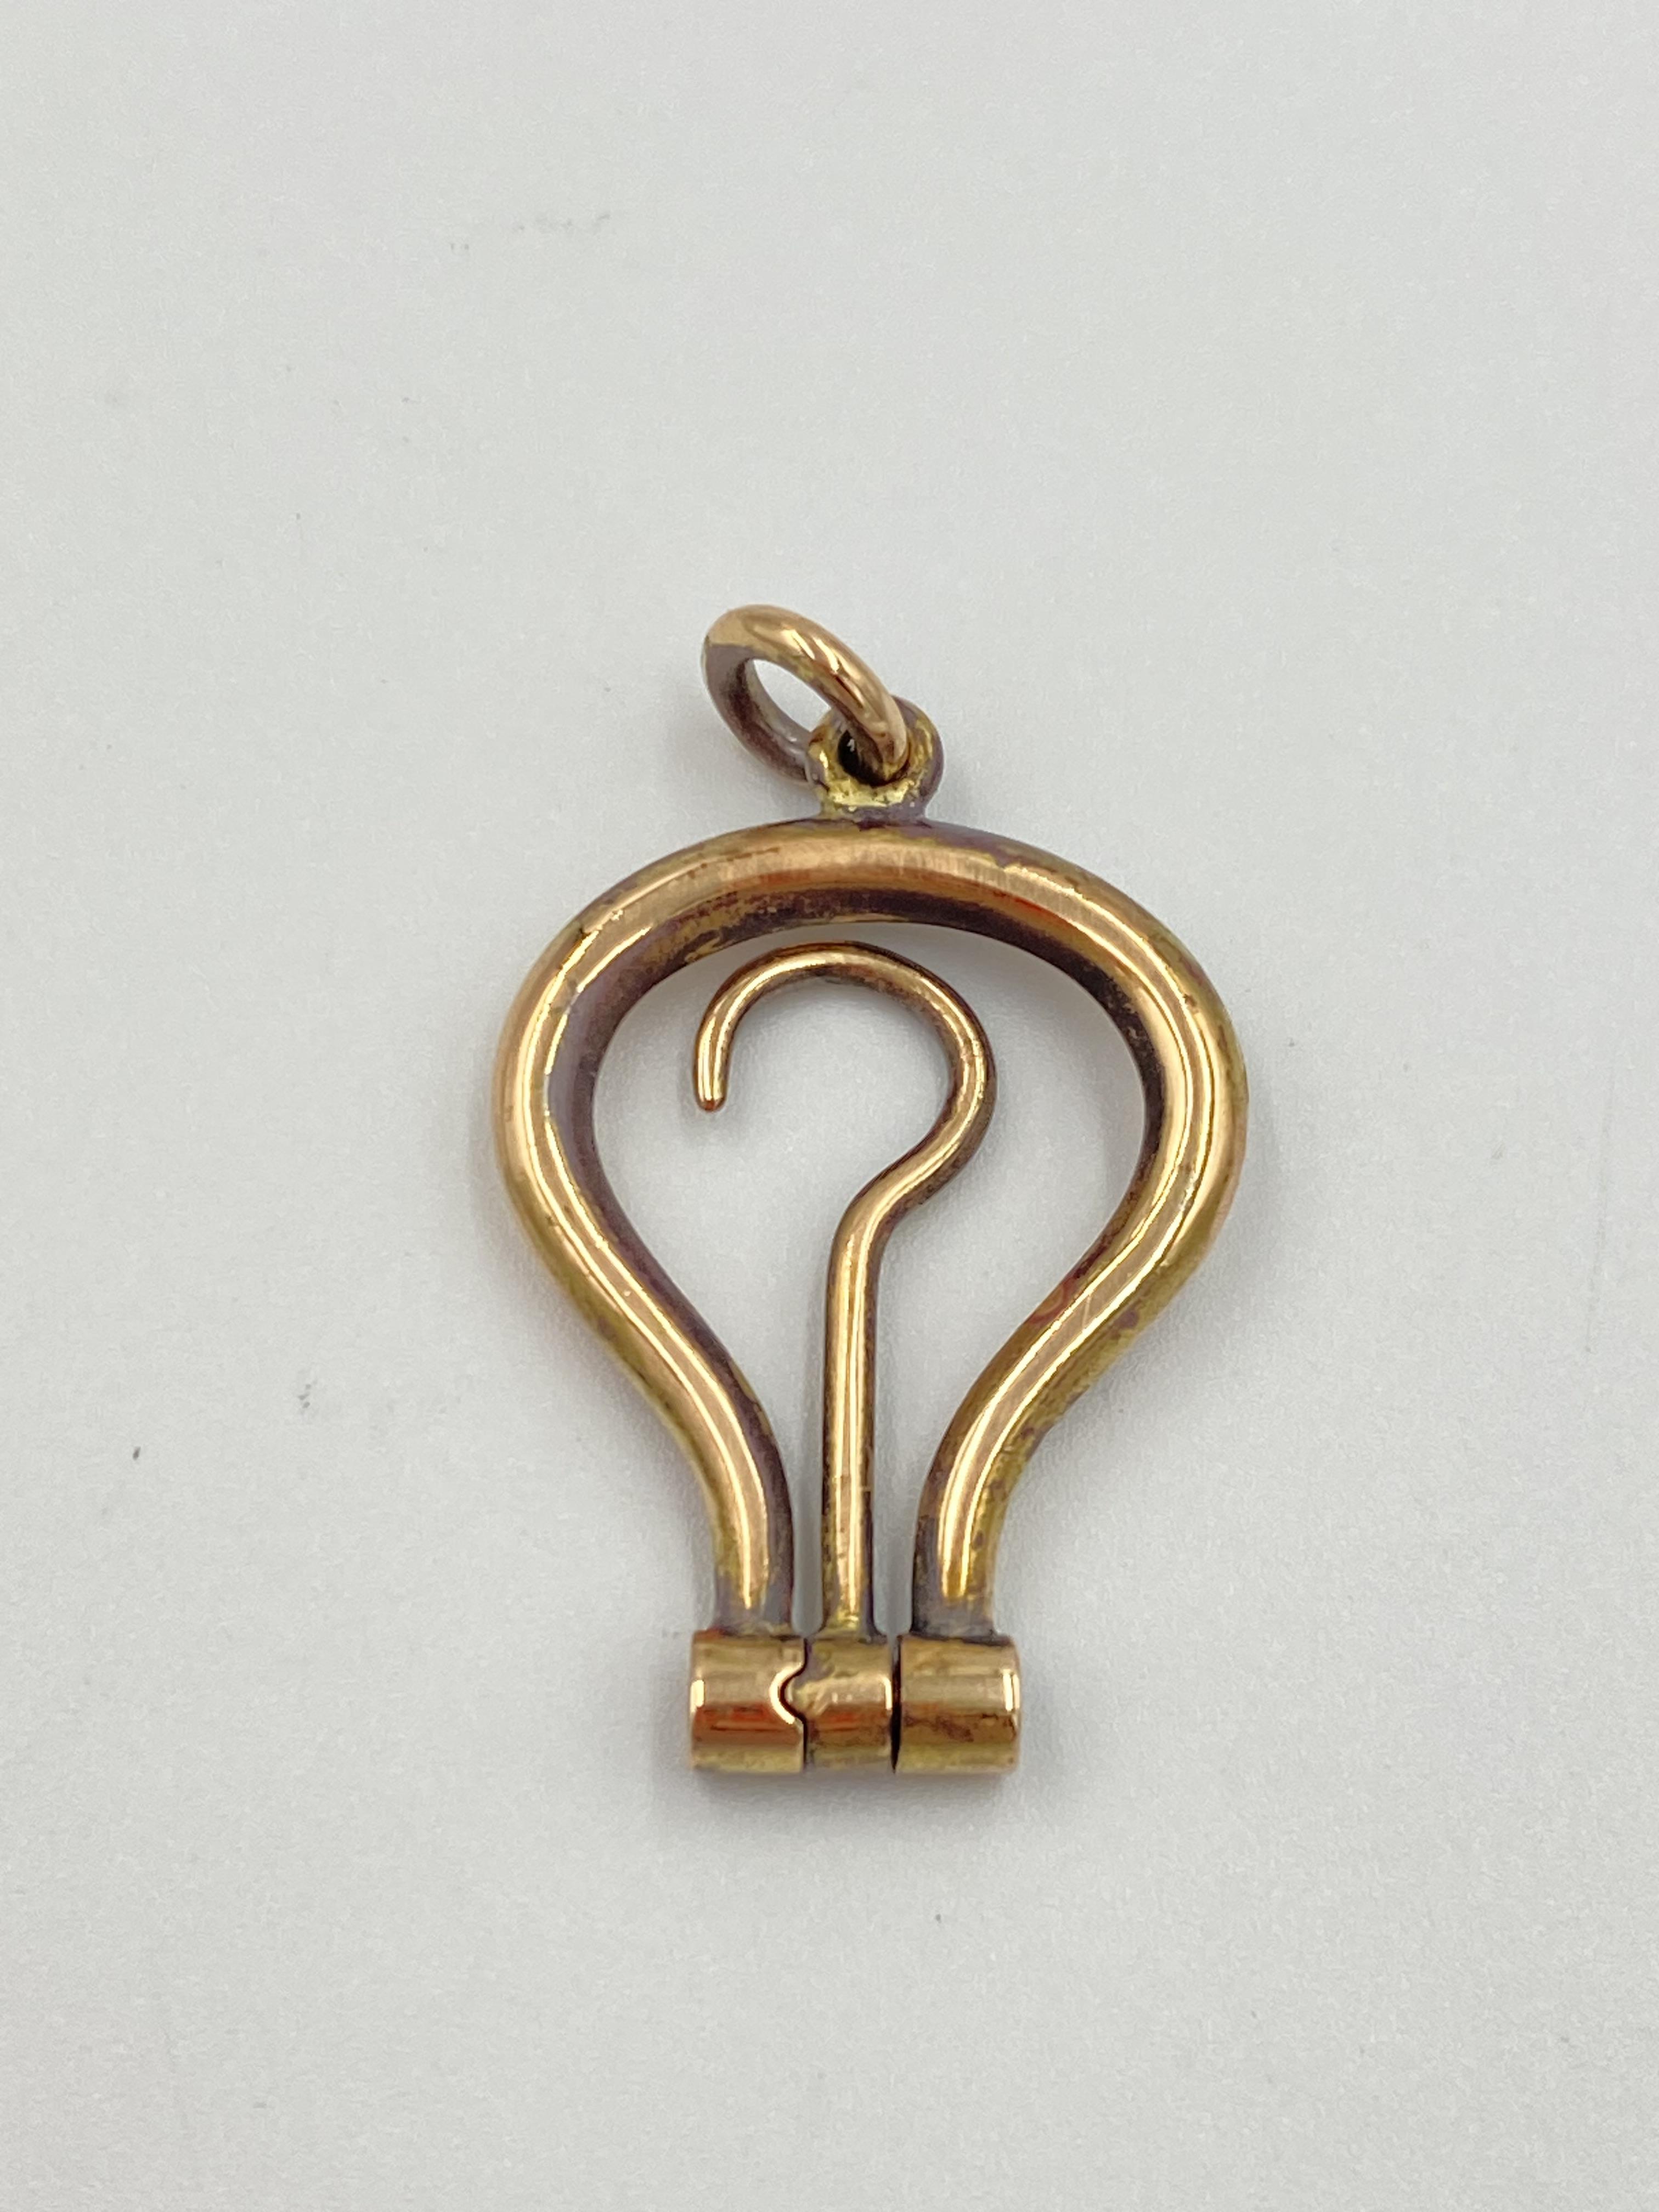 14ct gold folding button hook - Image 3 of 3